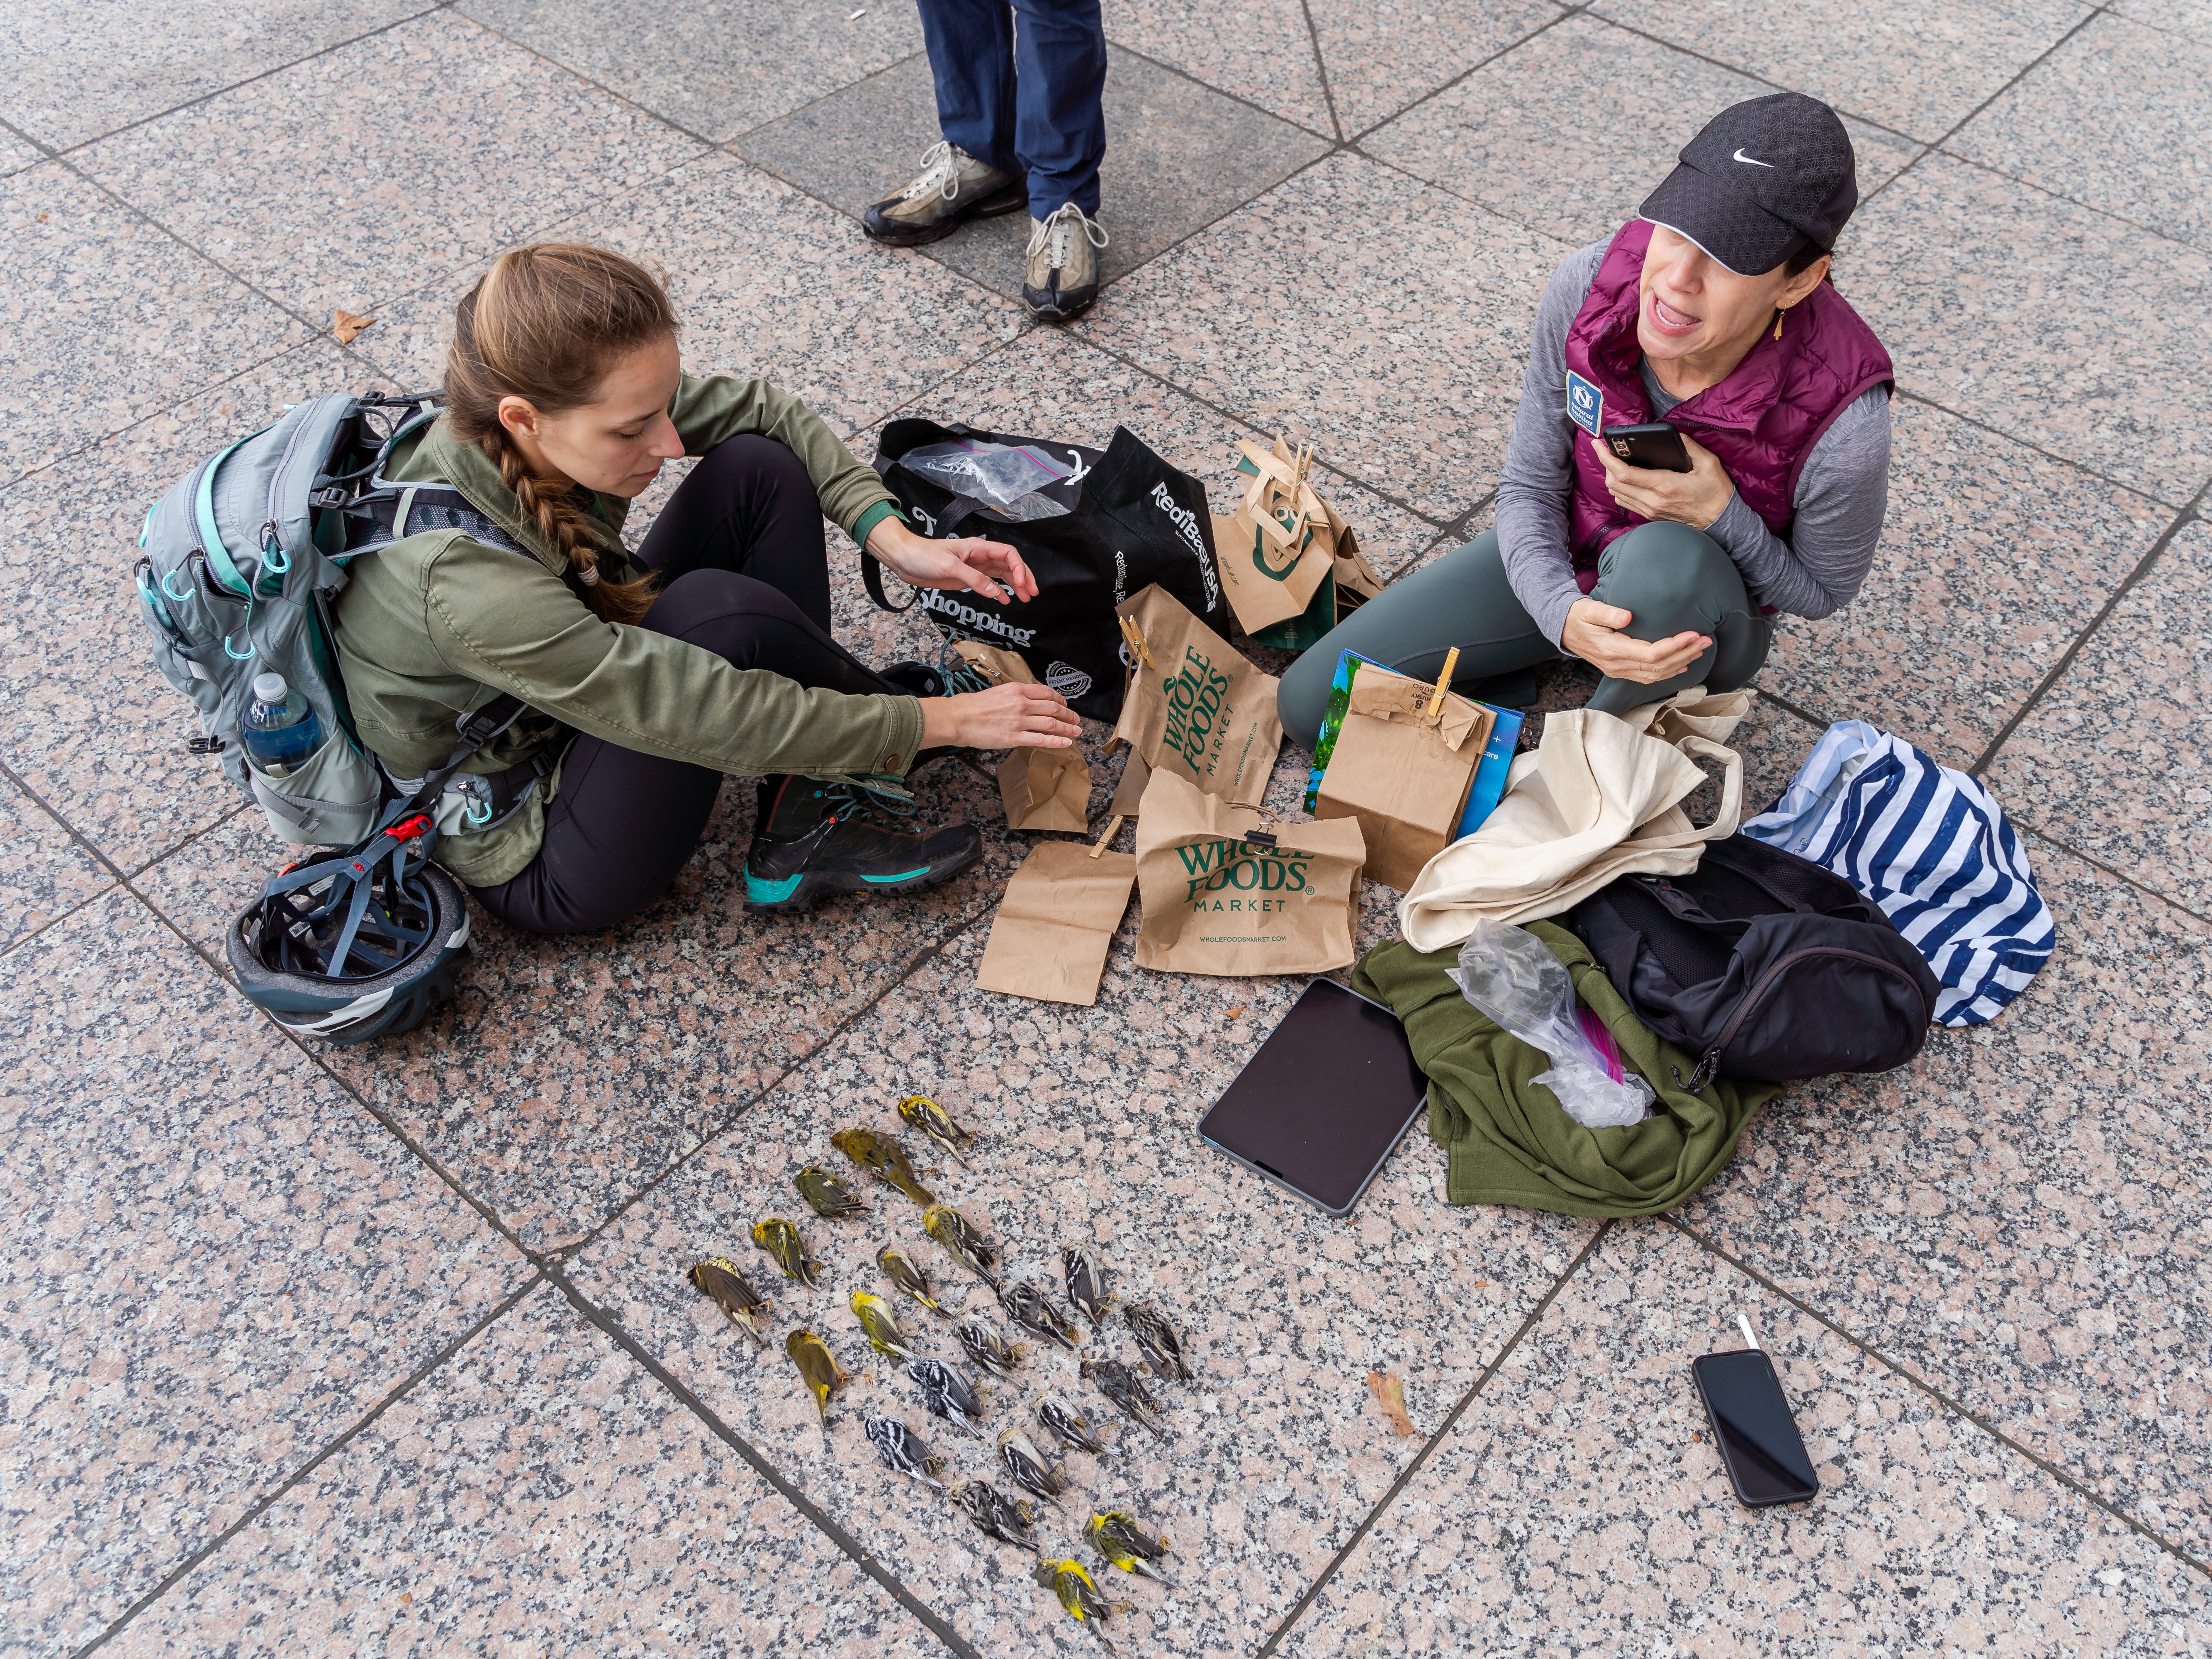 Collision monitors Fruzsina Agocs (left) and Hilary Berliner (right) sort through dead and injured birds found in a single morning in downtown Manhattan. Photo: Winston Qin